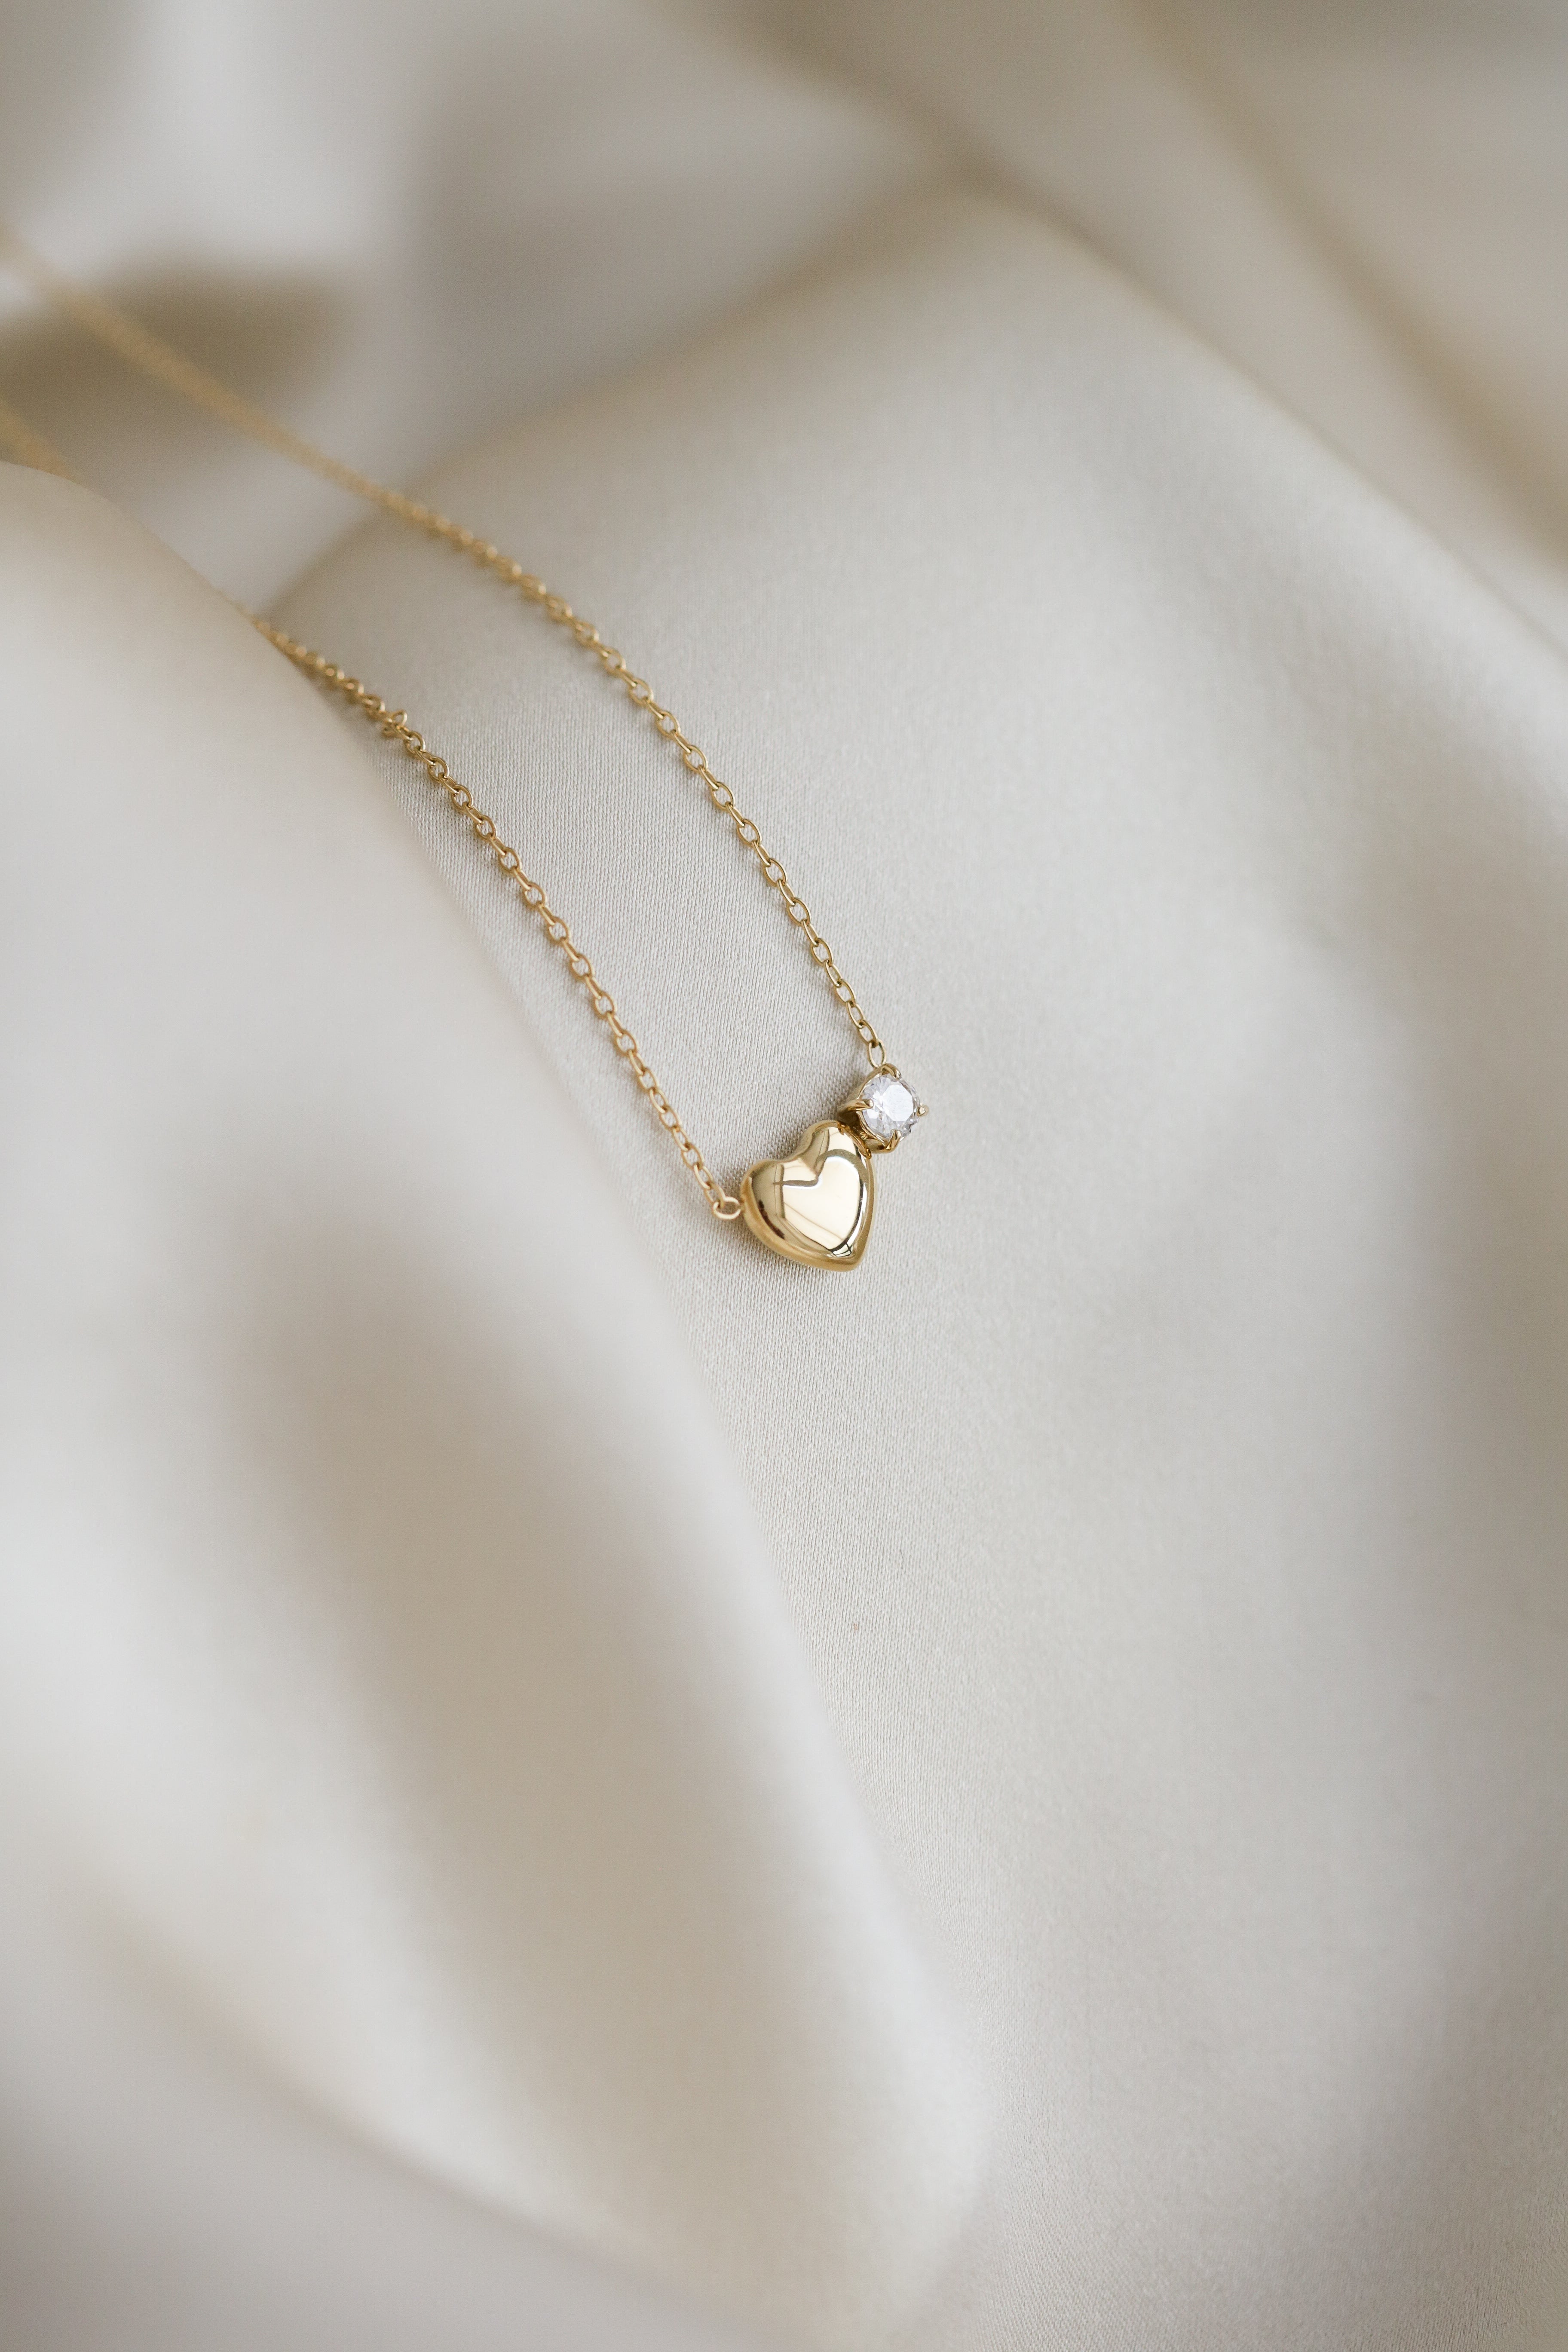 The Heart - Single Cubic Zirconia Necklace